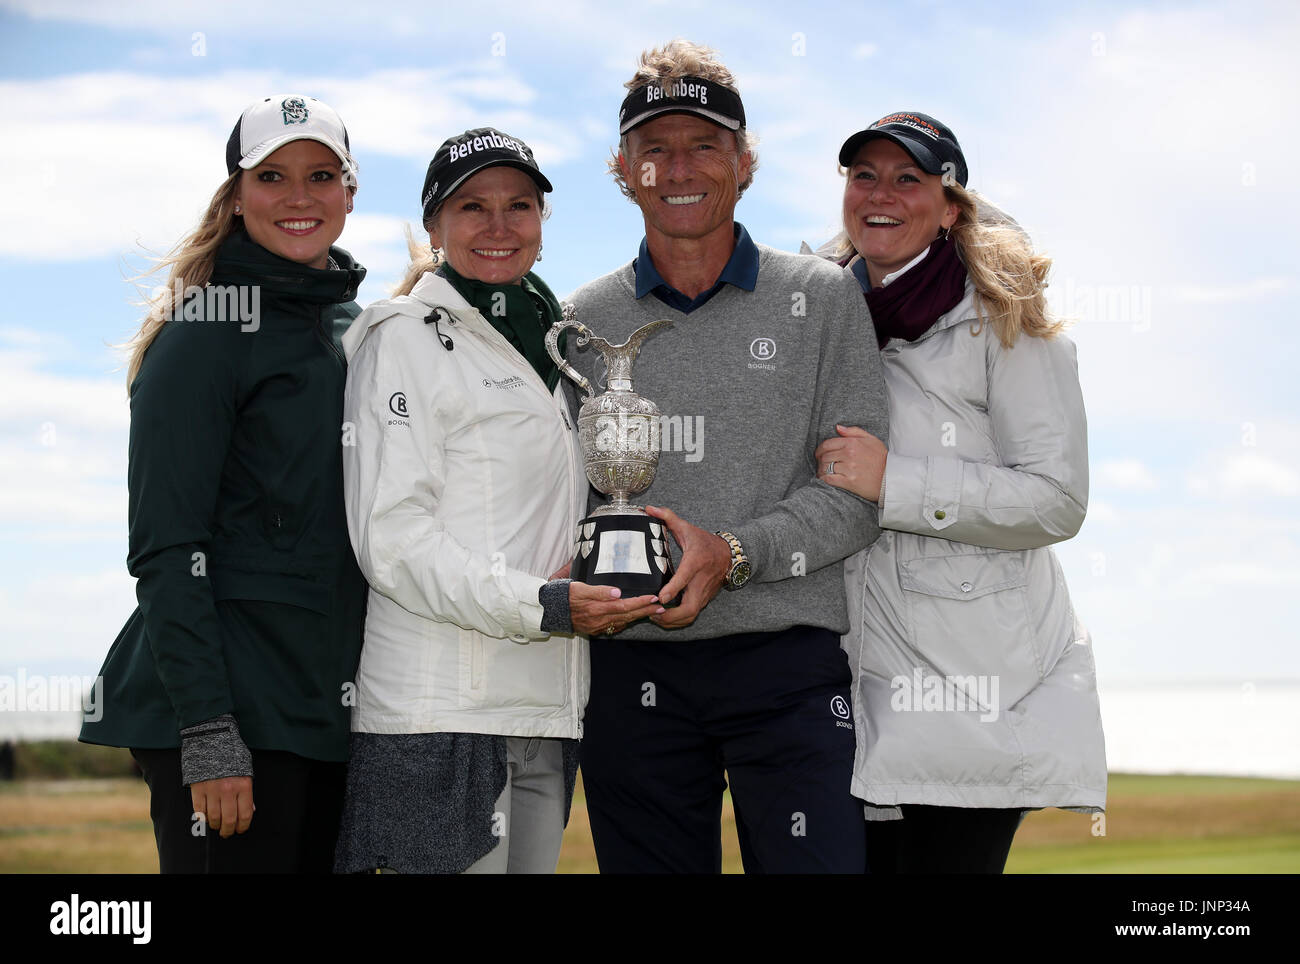 Germany's Bernhard Langer poses with the trophy alongside wife Vikki Carol  and daughters Christina Langer and Jackie Langer after winning the Senior  Open at Royal Porthcawl Golf Club, Porthcawl Stock Photo -